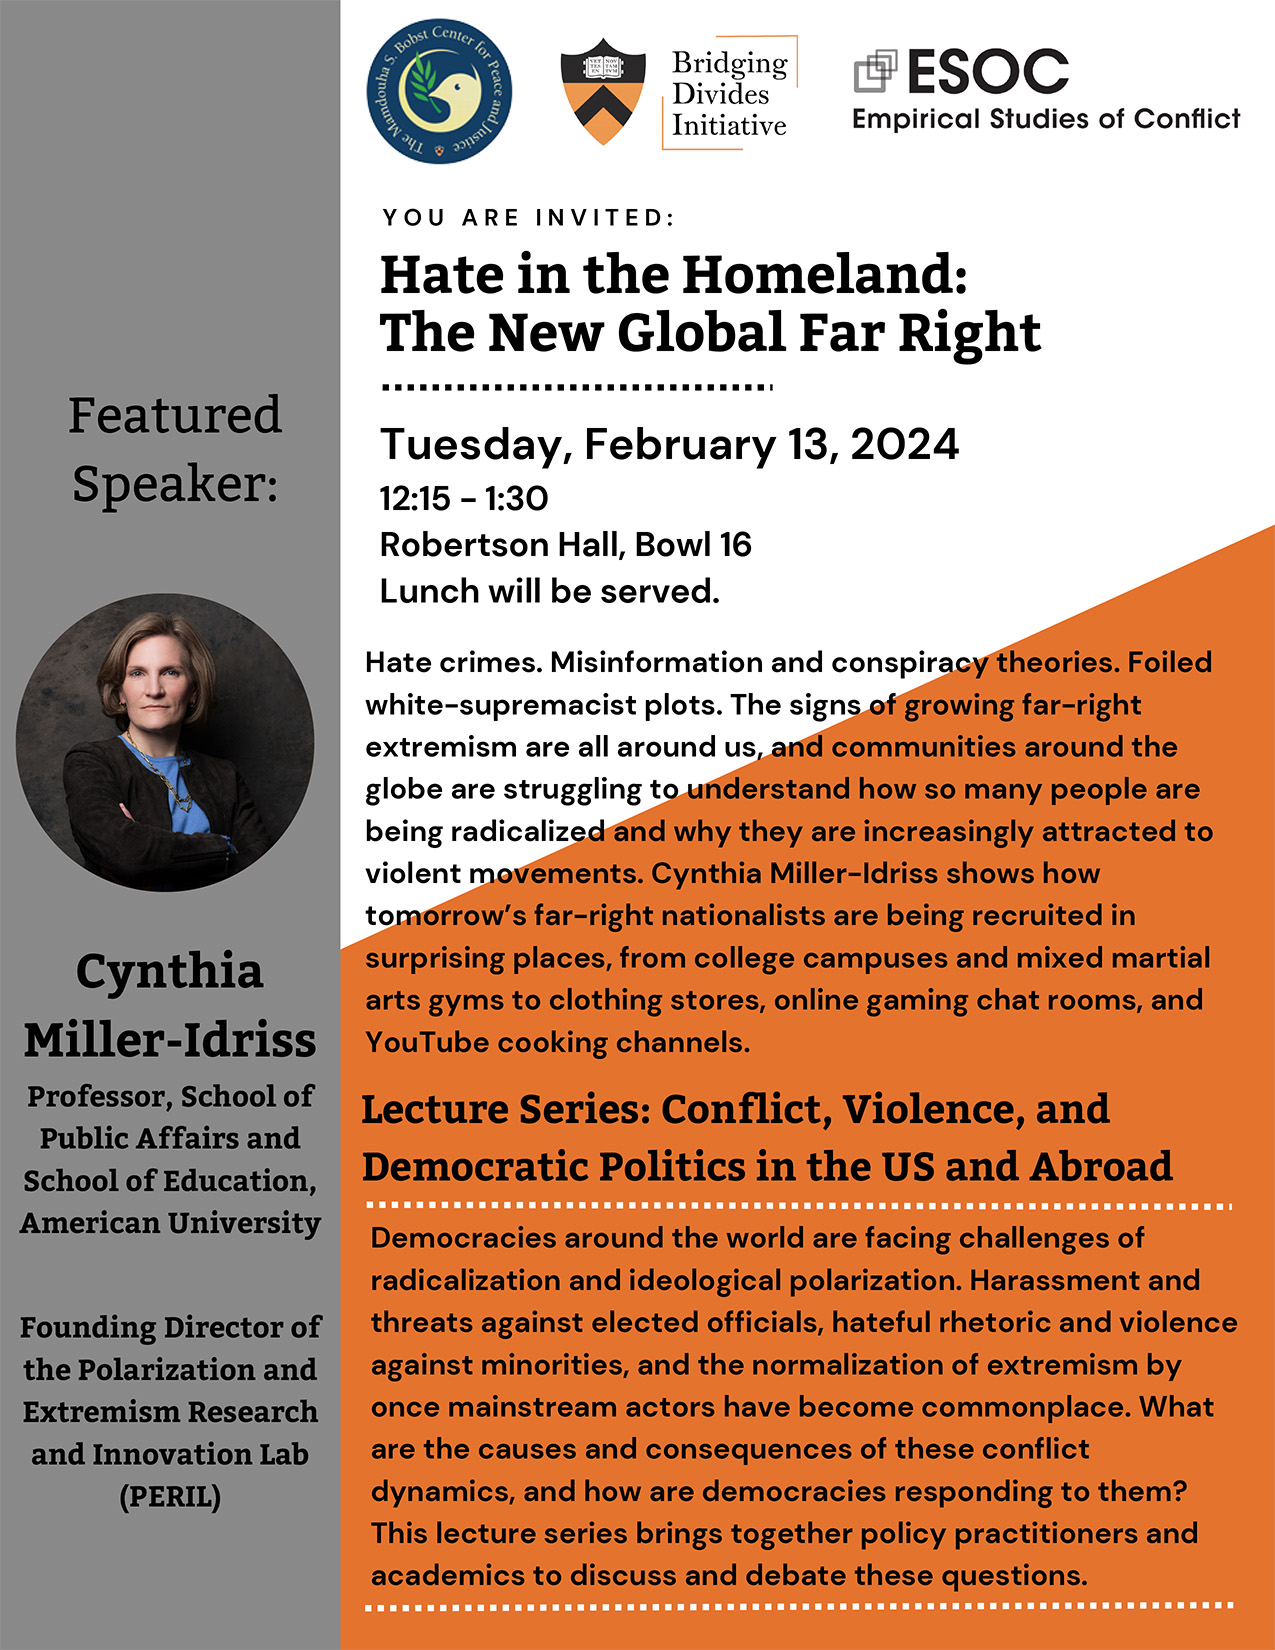 Hate in the Homeland: The New Global Far Right event flyer